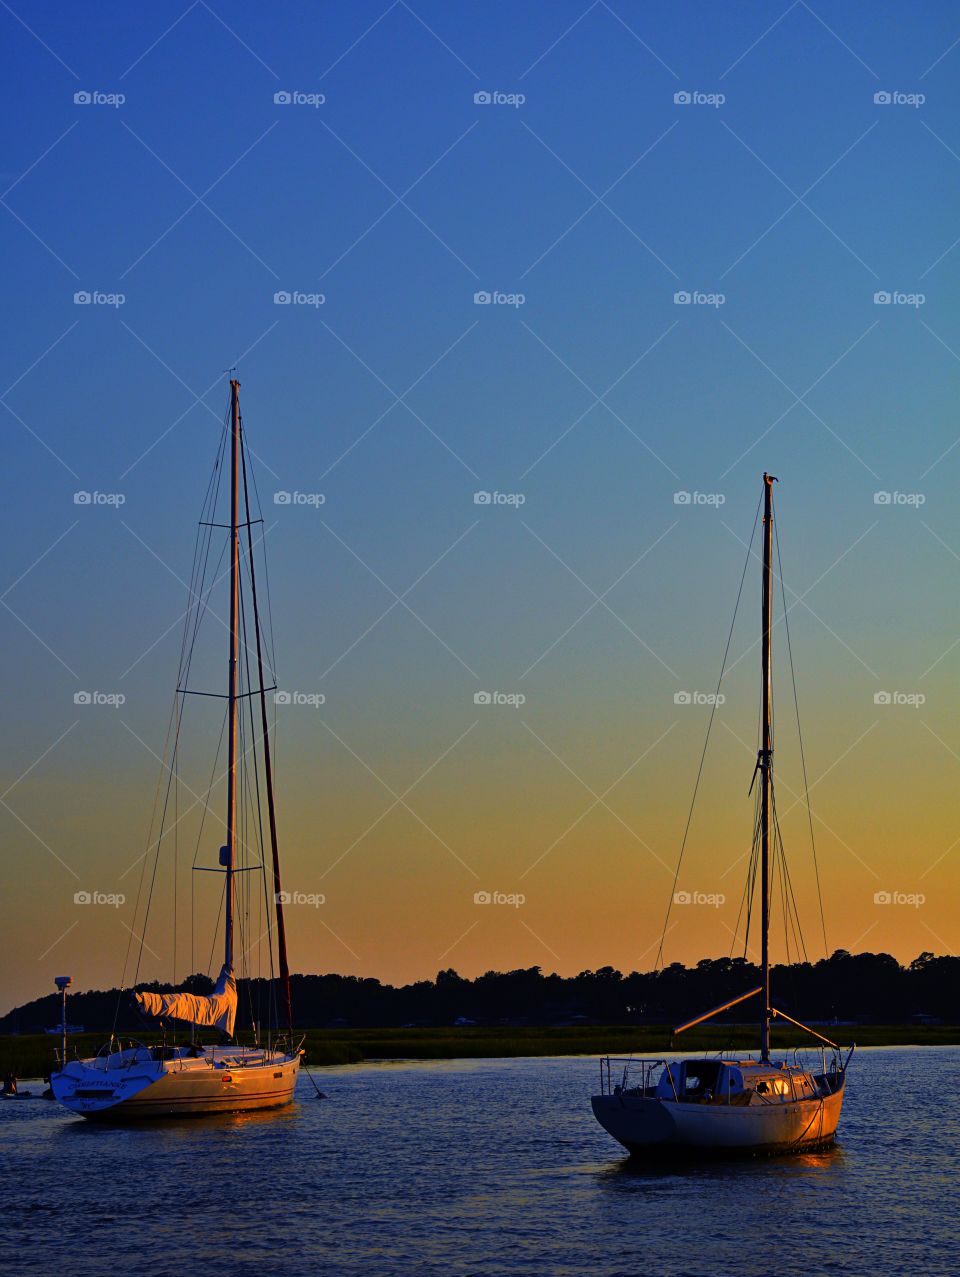 Sailboats in sea during sunset